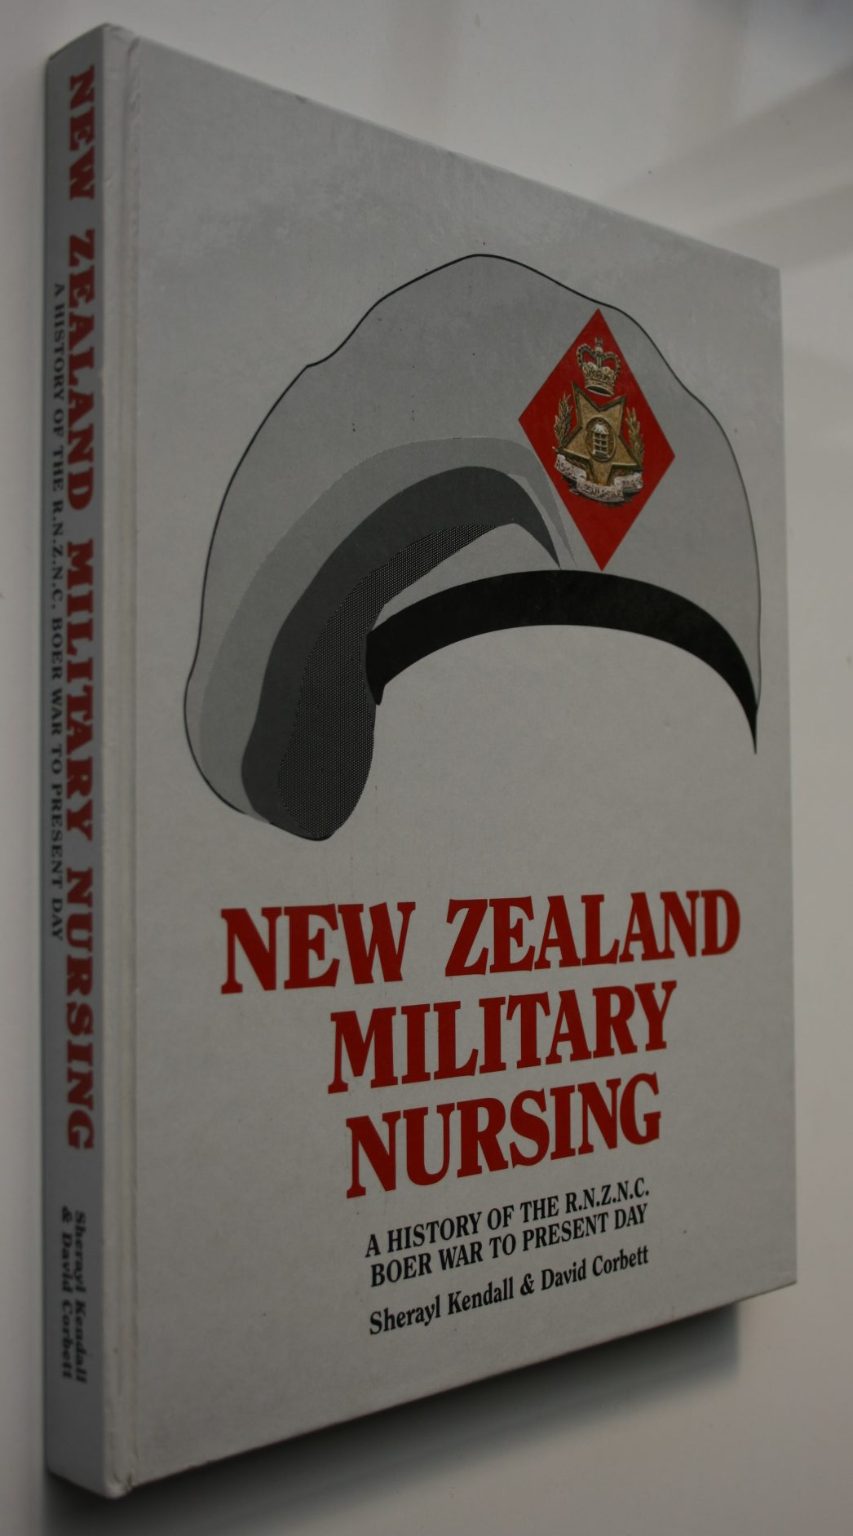 New Zealand Military Nursing: A History of the R.N.Z.N.C. Boer War to Present Day by Sherayl Kendall &amp; David Corbett. SIGNED BY CORBETT.